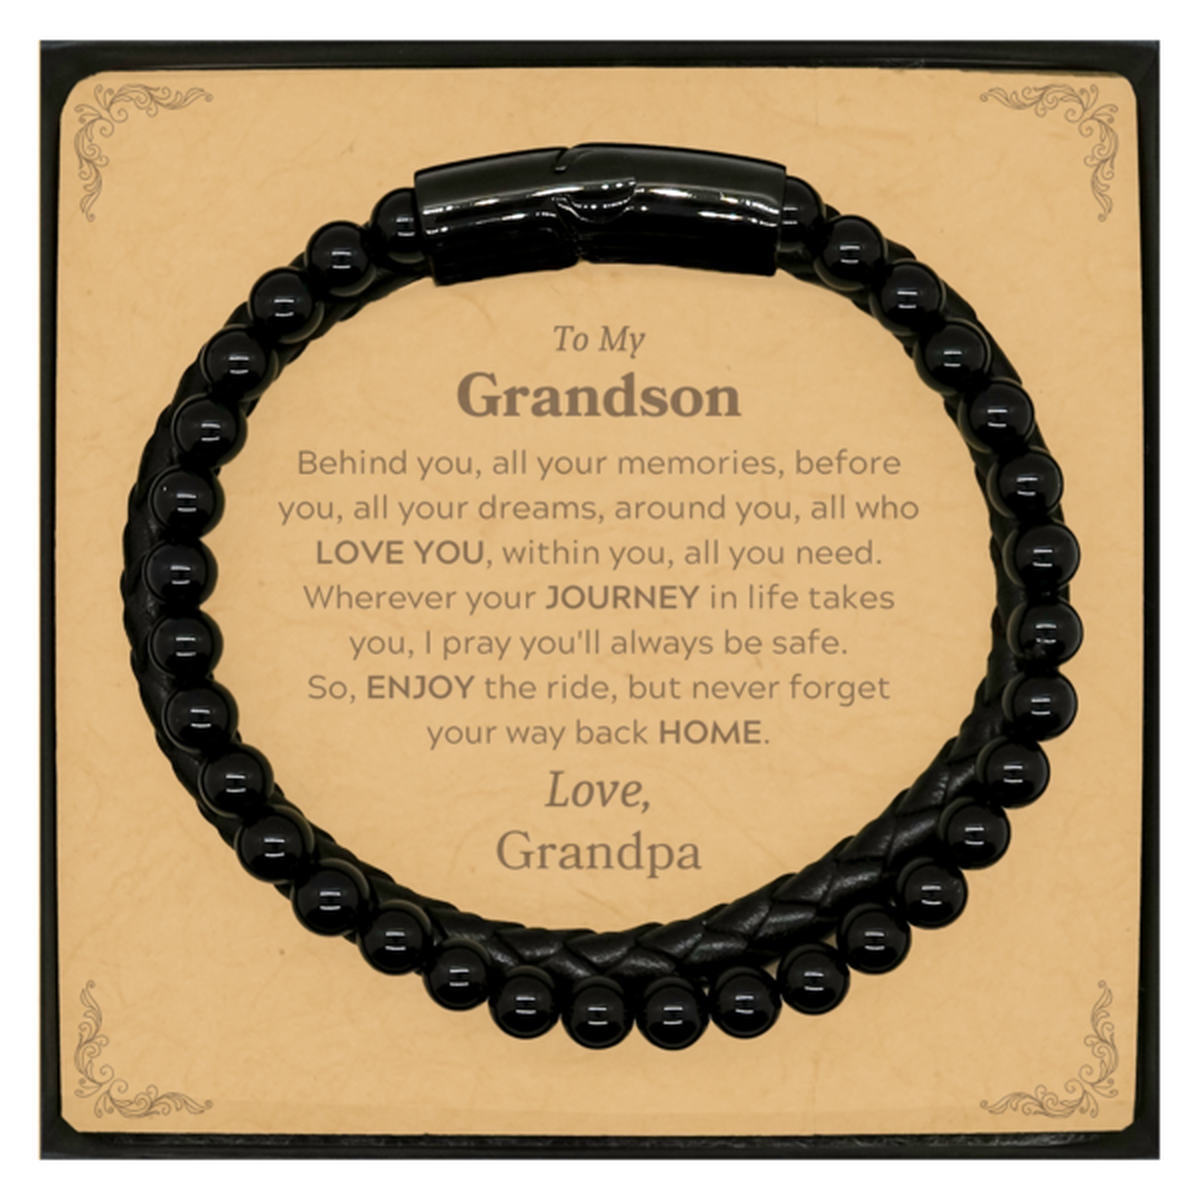 To My Grandson Graduation Gifts from Grandpa, Grandson Stone Leather Bracelets Christmas Birthday Gifts for Grandson Behind you, all your memories, before you, all your dreams. Love, Grandpa